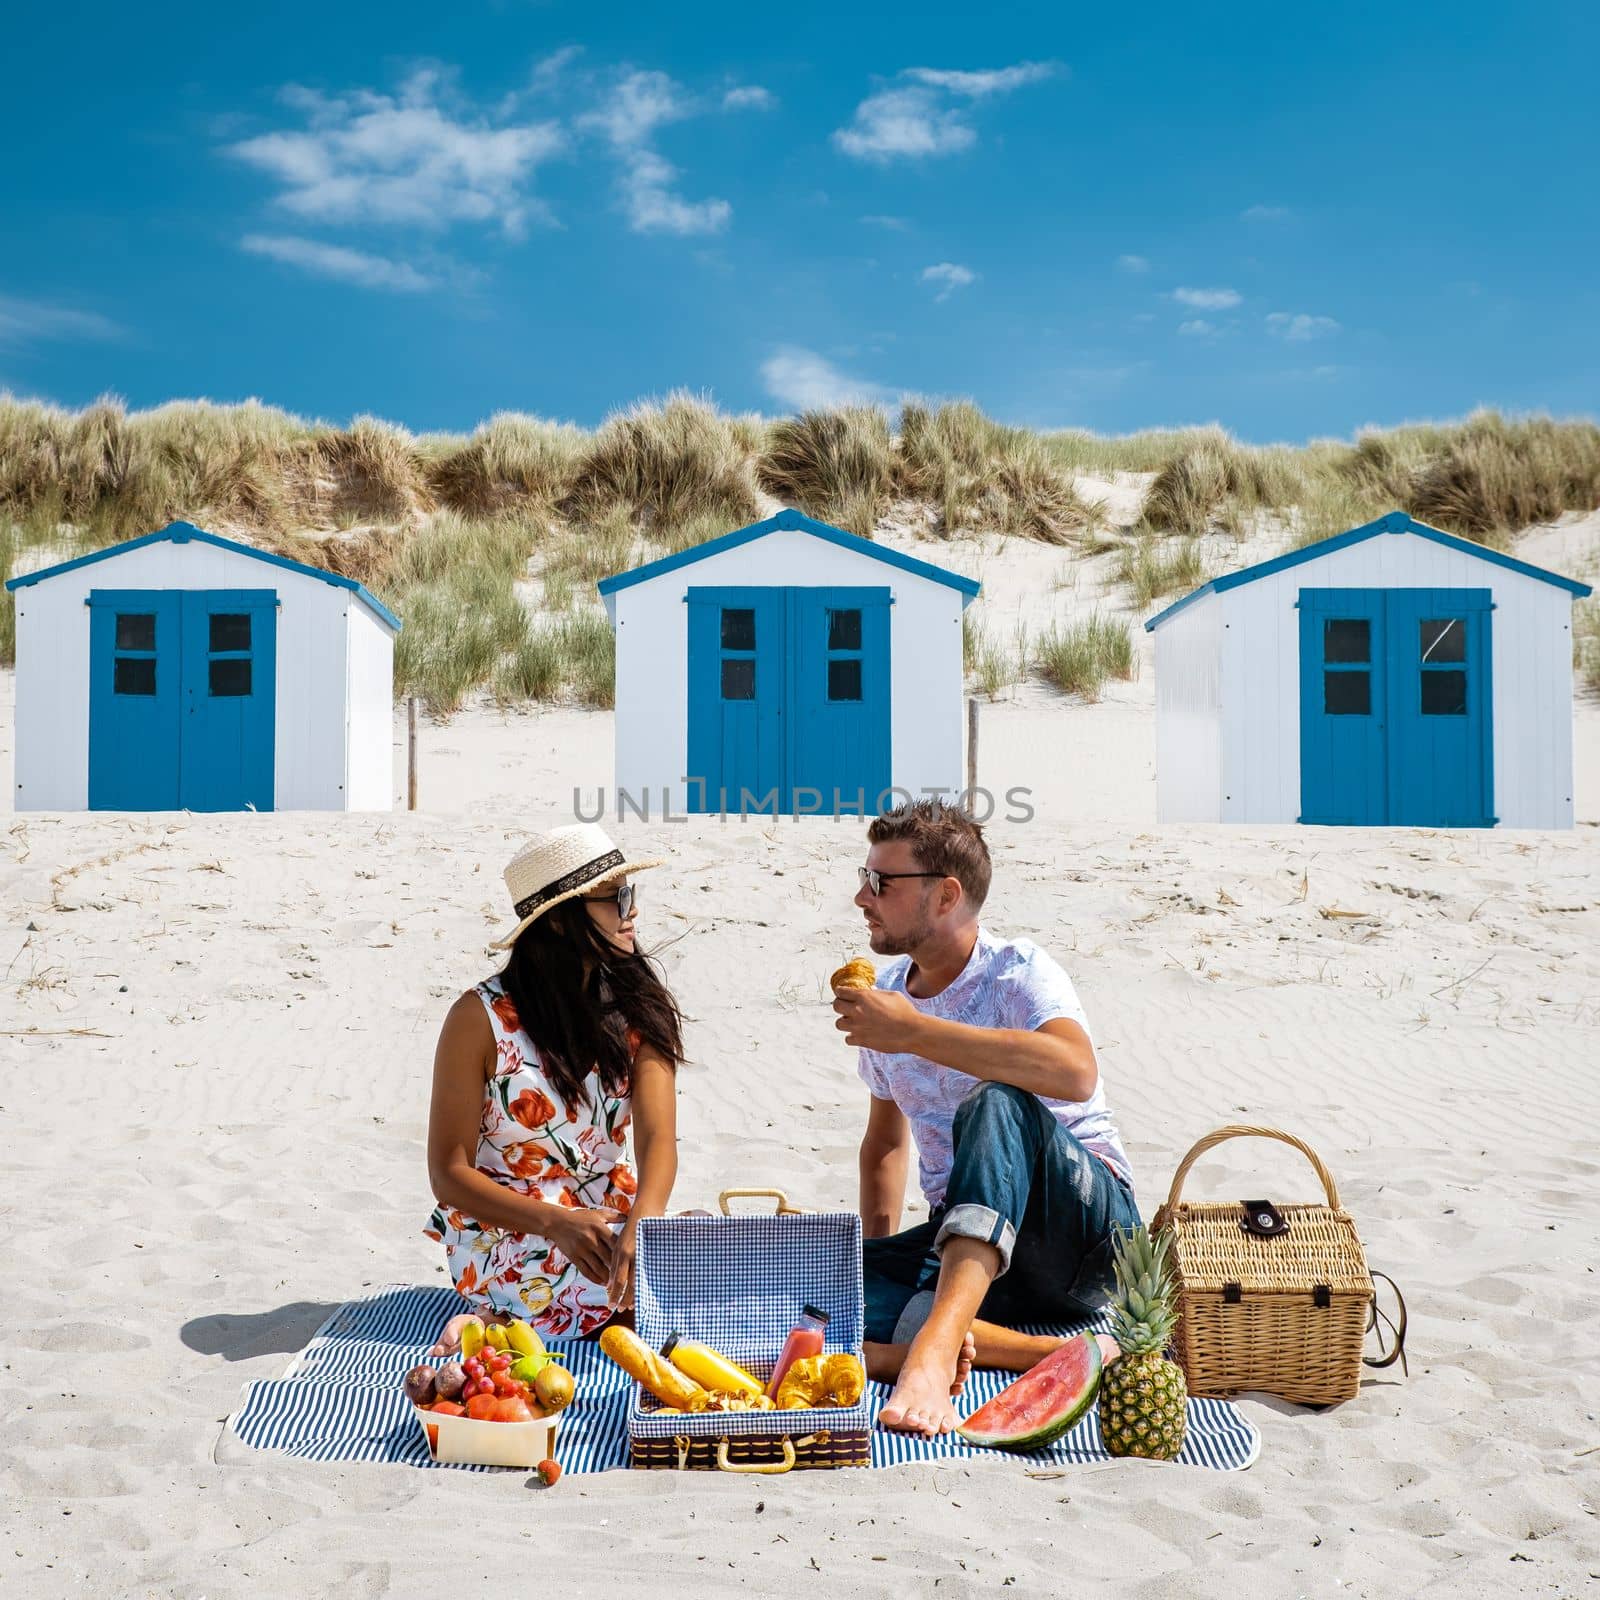 Picnic on the beach Texel Netherlands, couple having picnic on the beach of Texel  by fokkebok